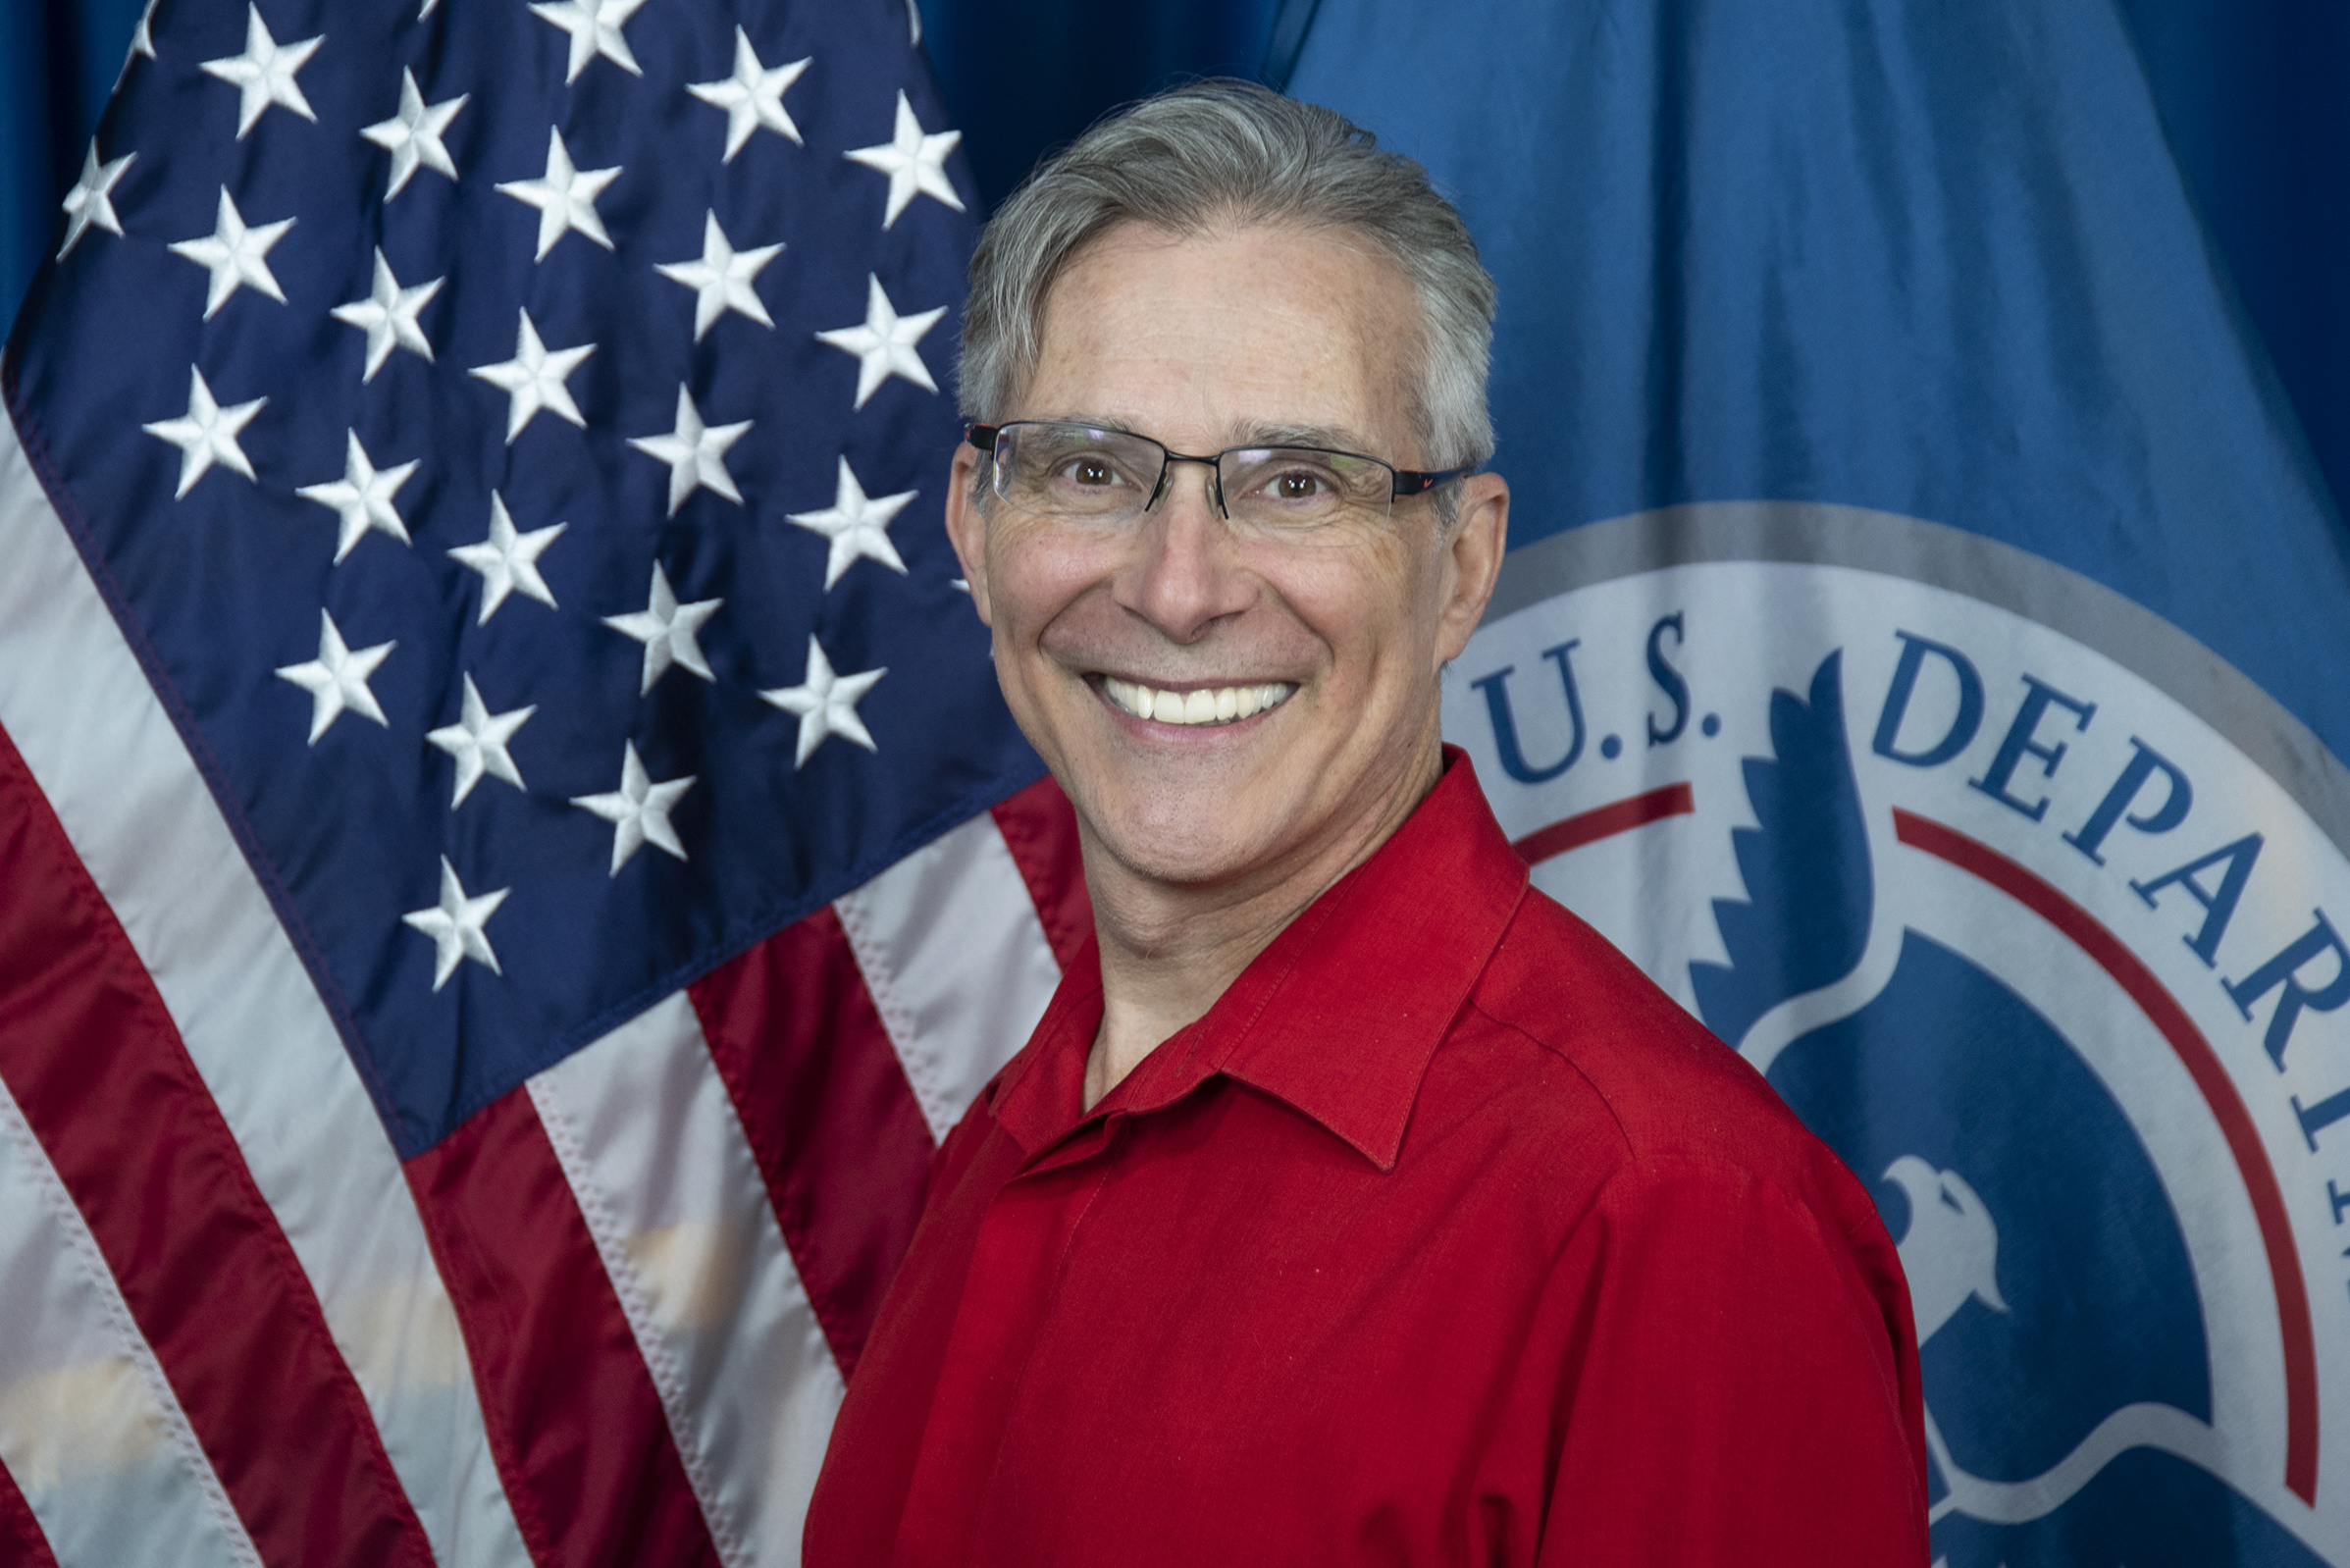 A photo of a man in a red shirt smiling and wearing glasses, with the background of the photo the United States flag on the left and the Department of Homeland Security flag on the right.